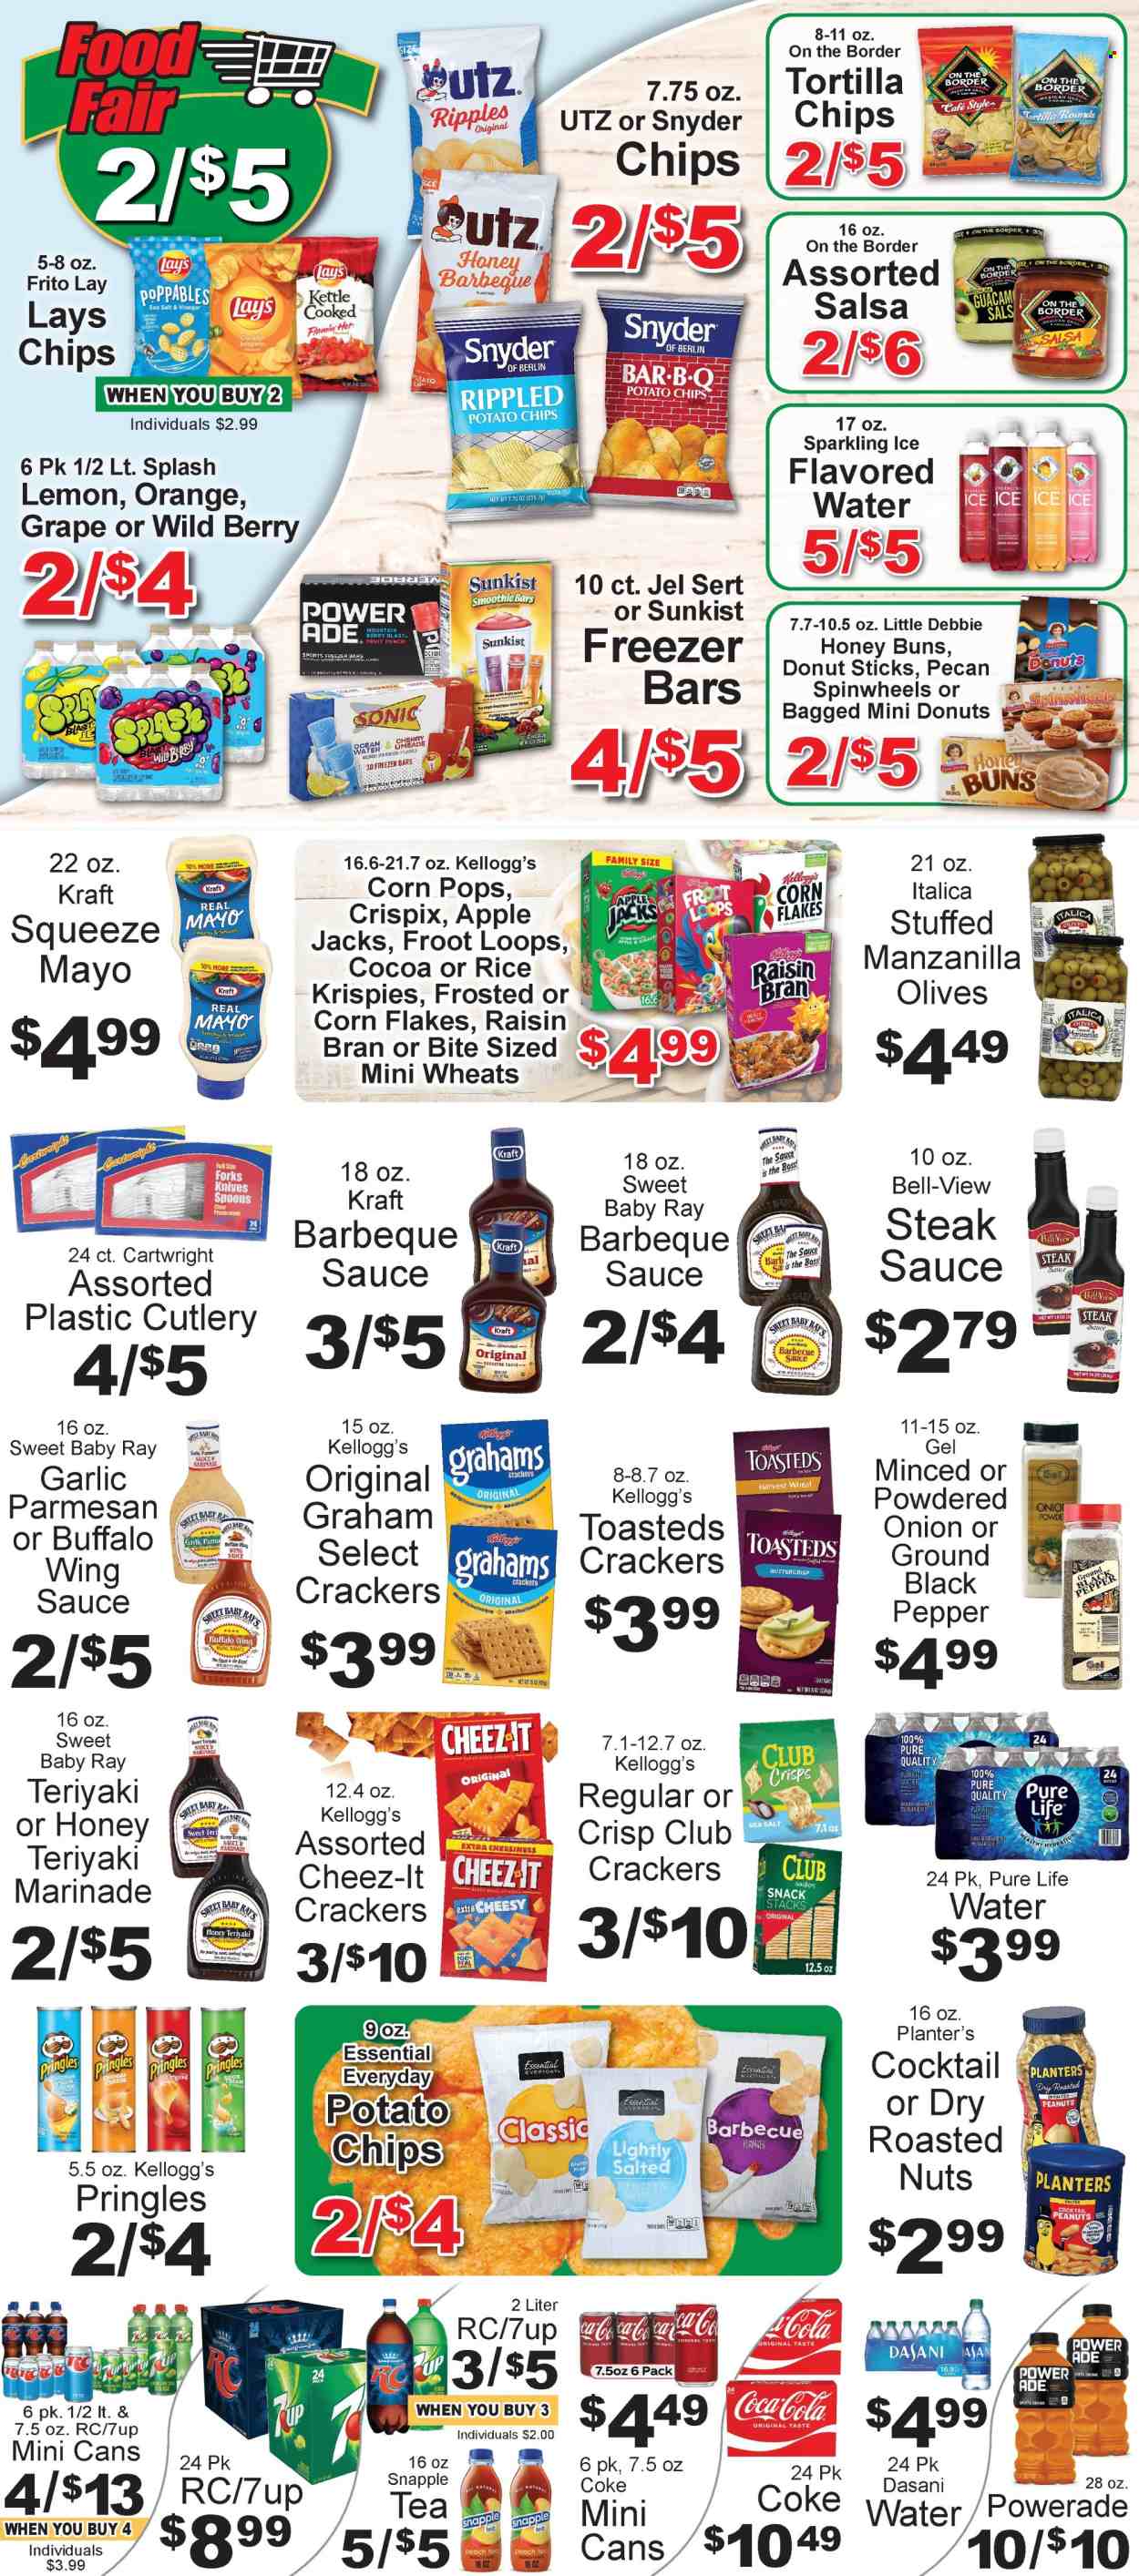 thumbnail - Food Fair Market Flyer - 06/30/2024 - 07/06/2024 - Sales products - buns, donut, cheese, mayonnaise, Mars, crackers, Kellogg's, bars, tortilla chips, potato chips, Pringles, chips, Lay’s, Cheez-It, salty snack, crisps, cocoa, olives, corn flakes, Corn Pops, Raisin Bran, black pepper, BBQ sauce, steak sauce, marinade, wing sauce, corn syrup, syrup, peanuts, Planters, Coca-Cola, Powerade, energy drink, ice tea, soft drink, 7UP, Snapple, Coke, electrolyte drink, smoothie, flavored water, purified water, Pure Life Water, carbonated soft drink. Page 4.